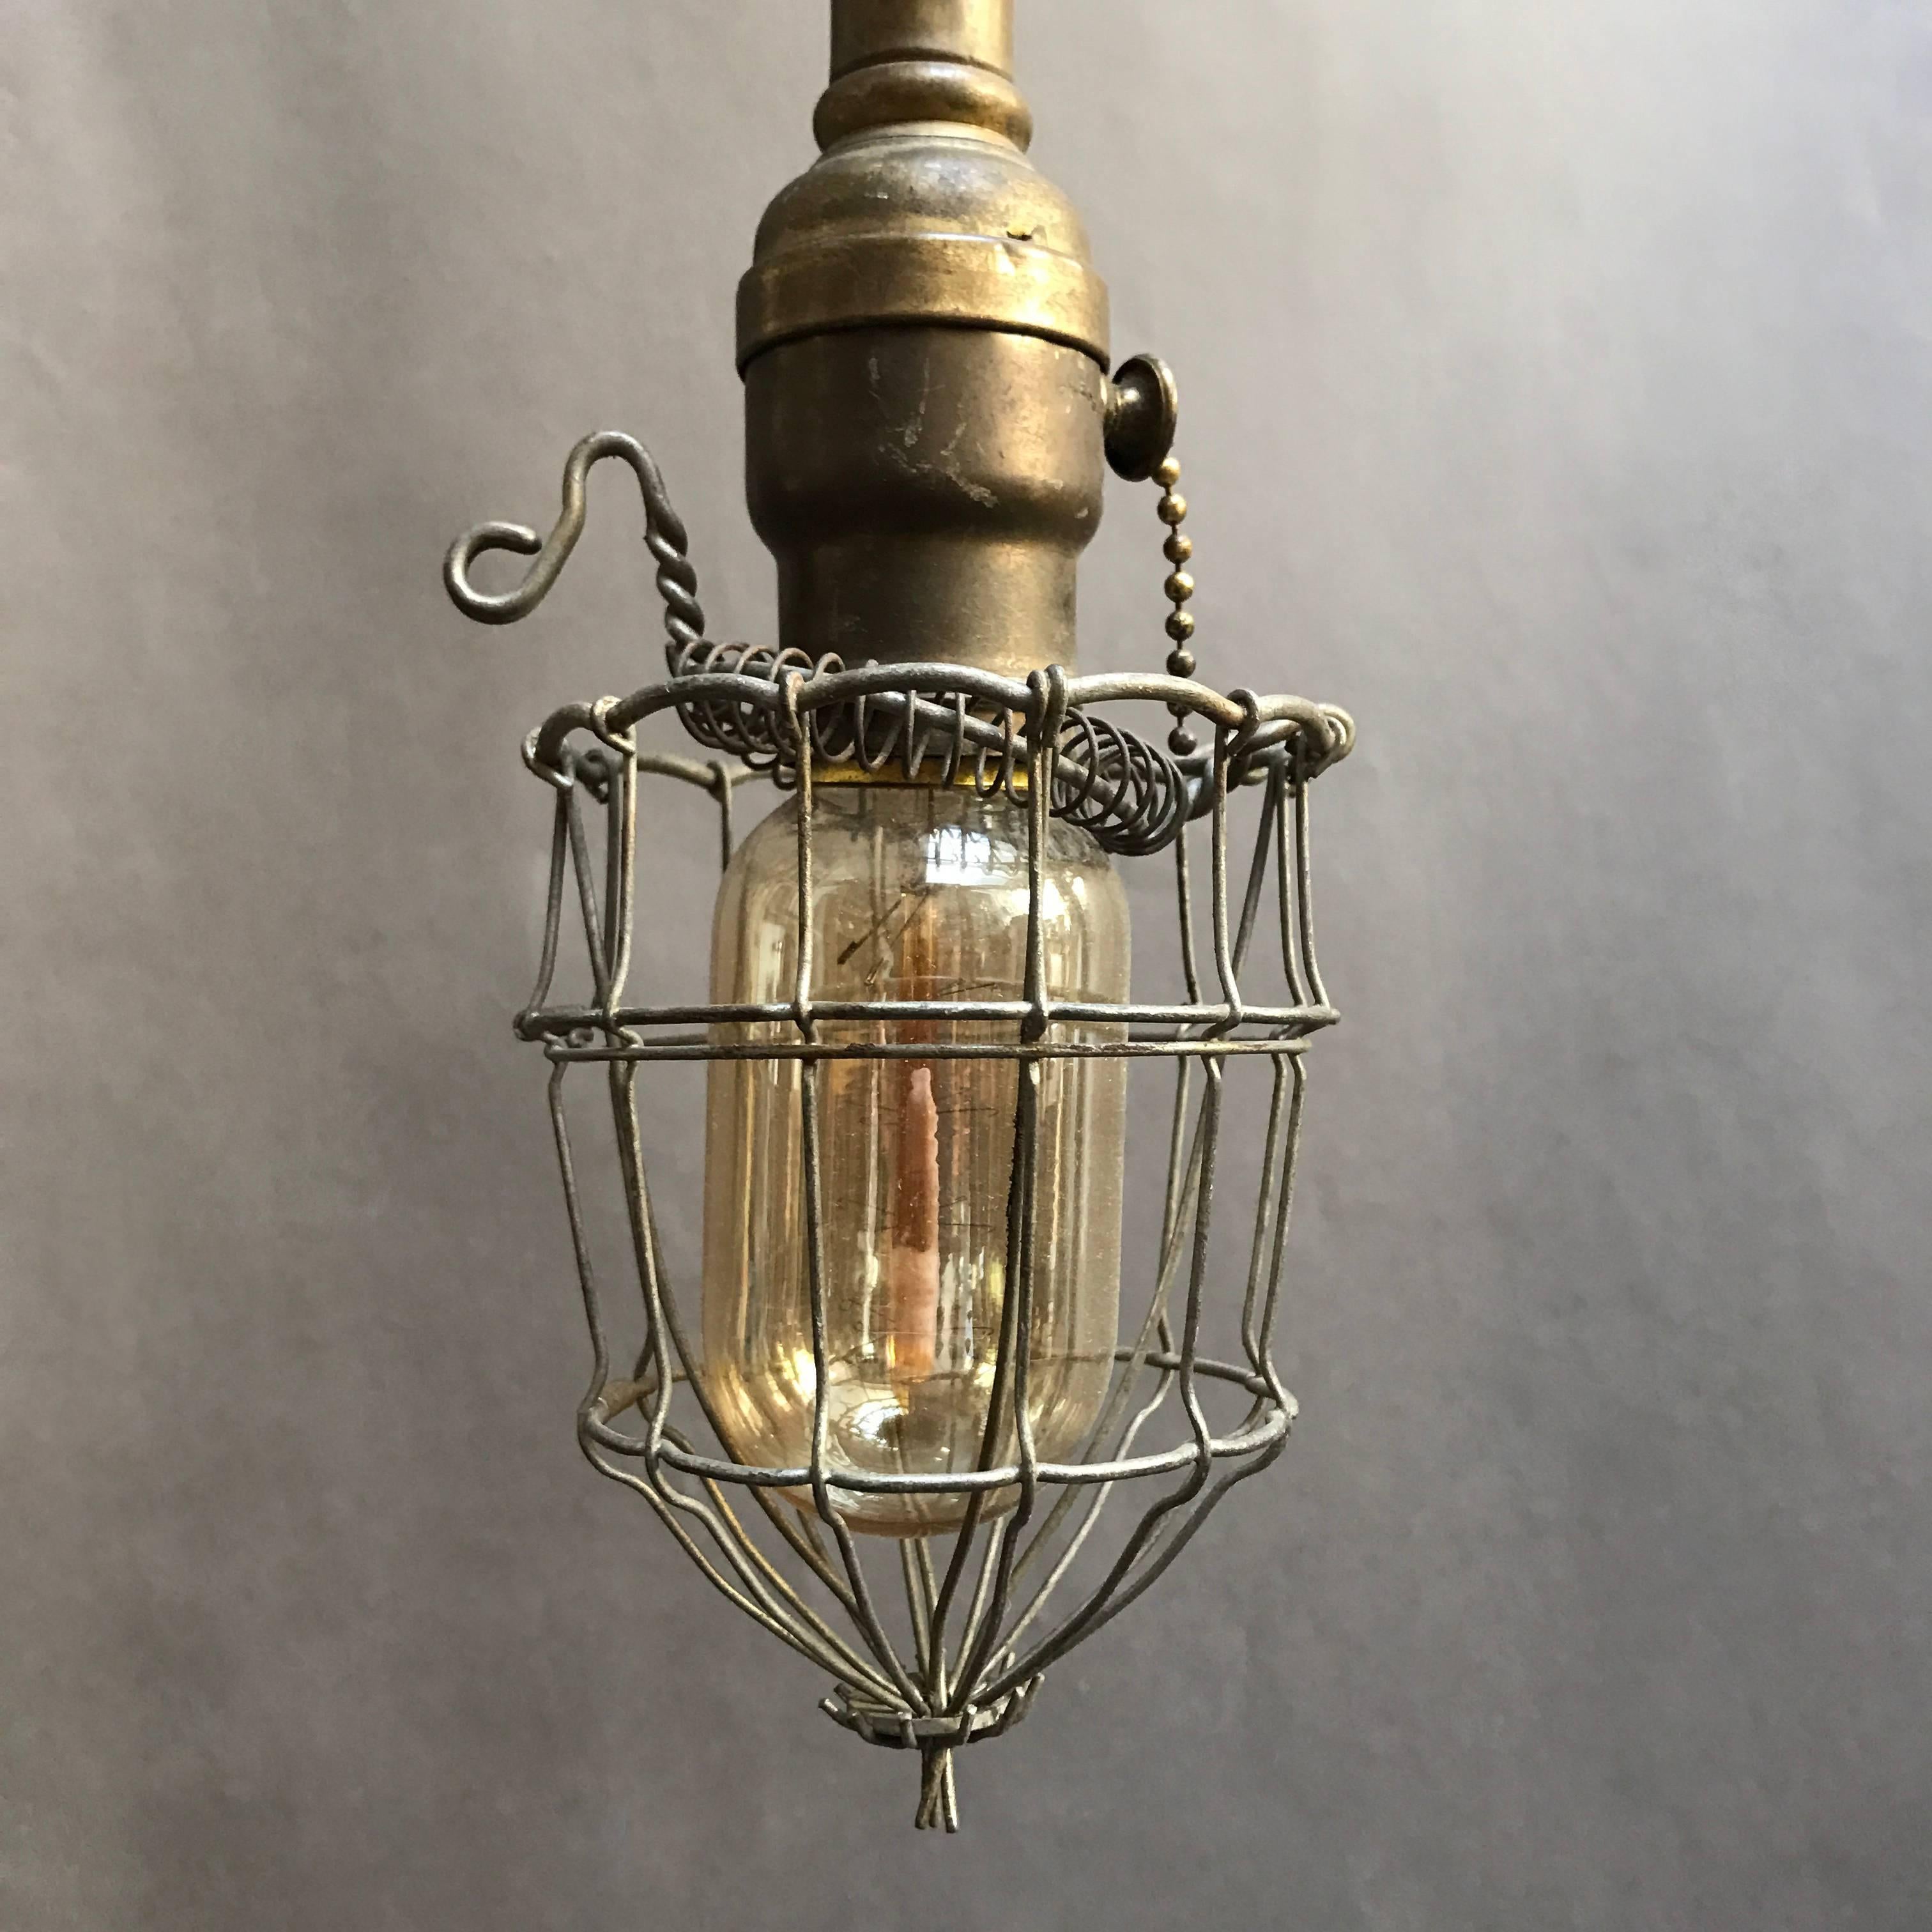 Lacquered Industrial Caged Utility Light Pendant with Wood Handle